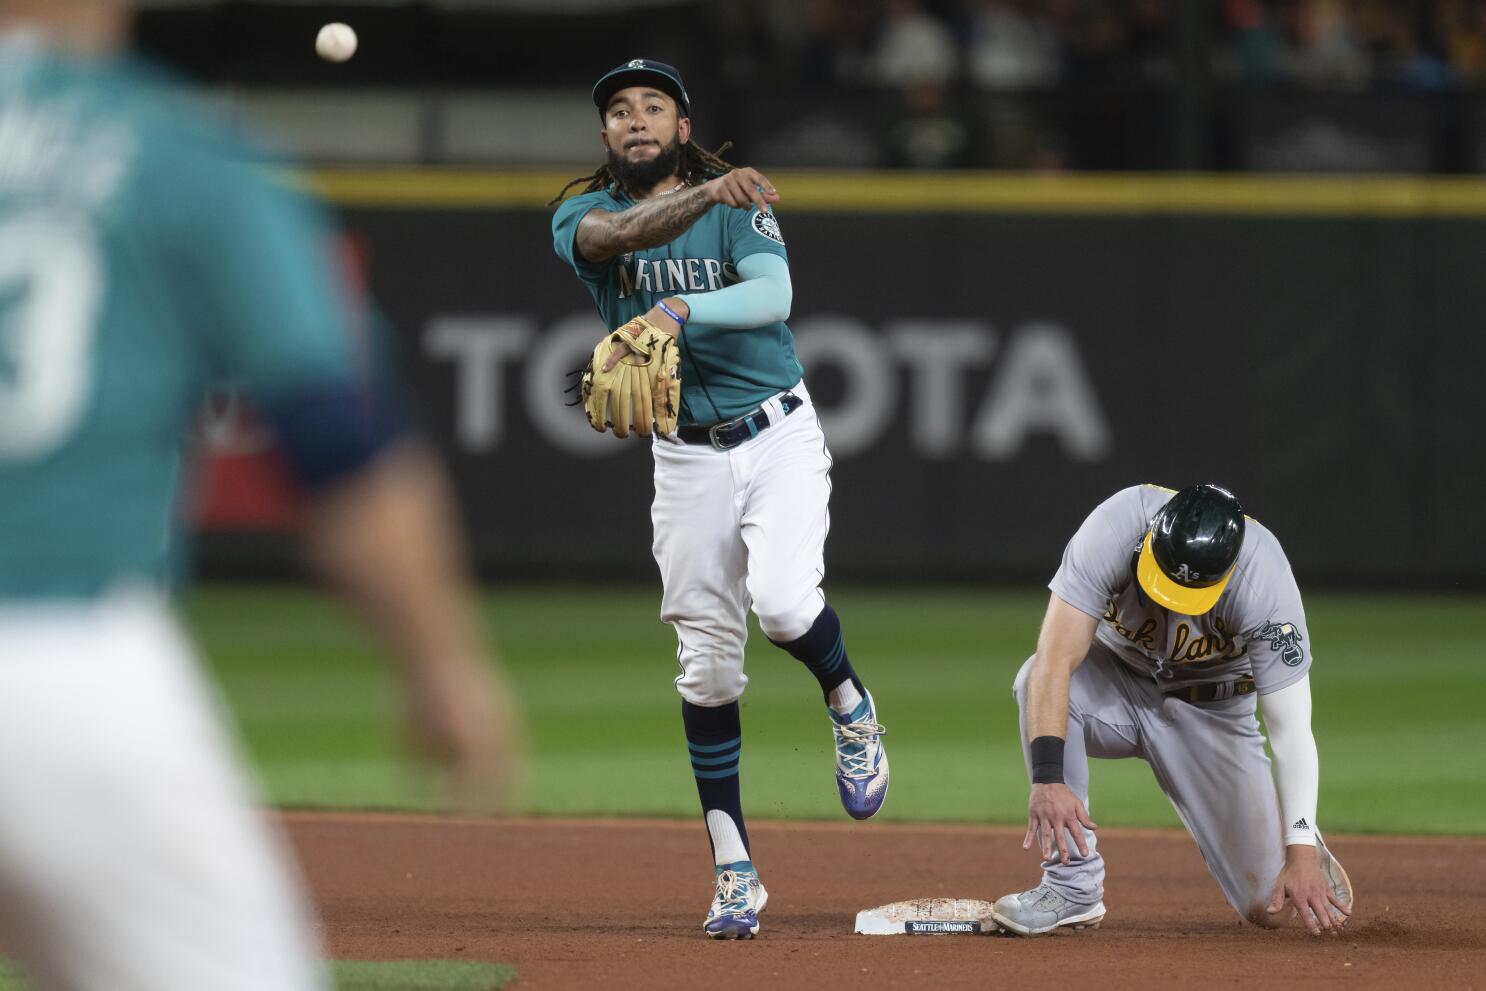 Mariners and Phillies went all in and ended their playoff droughts